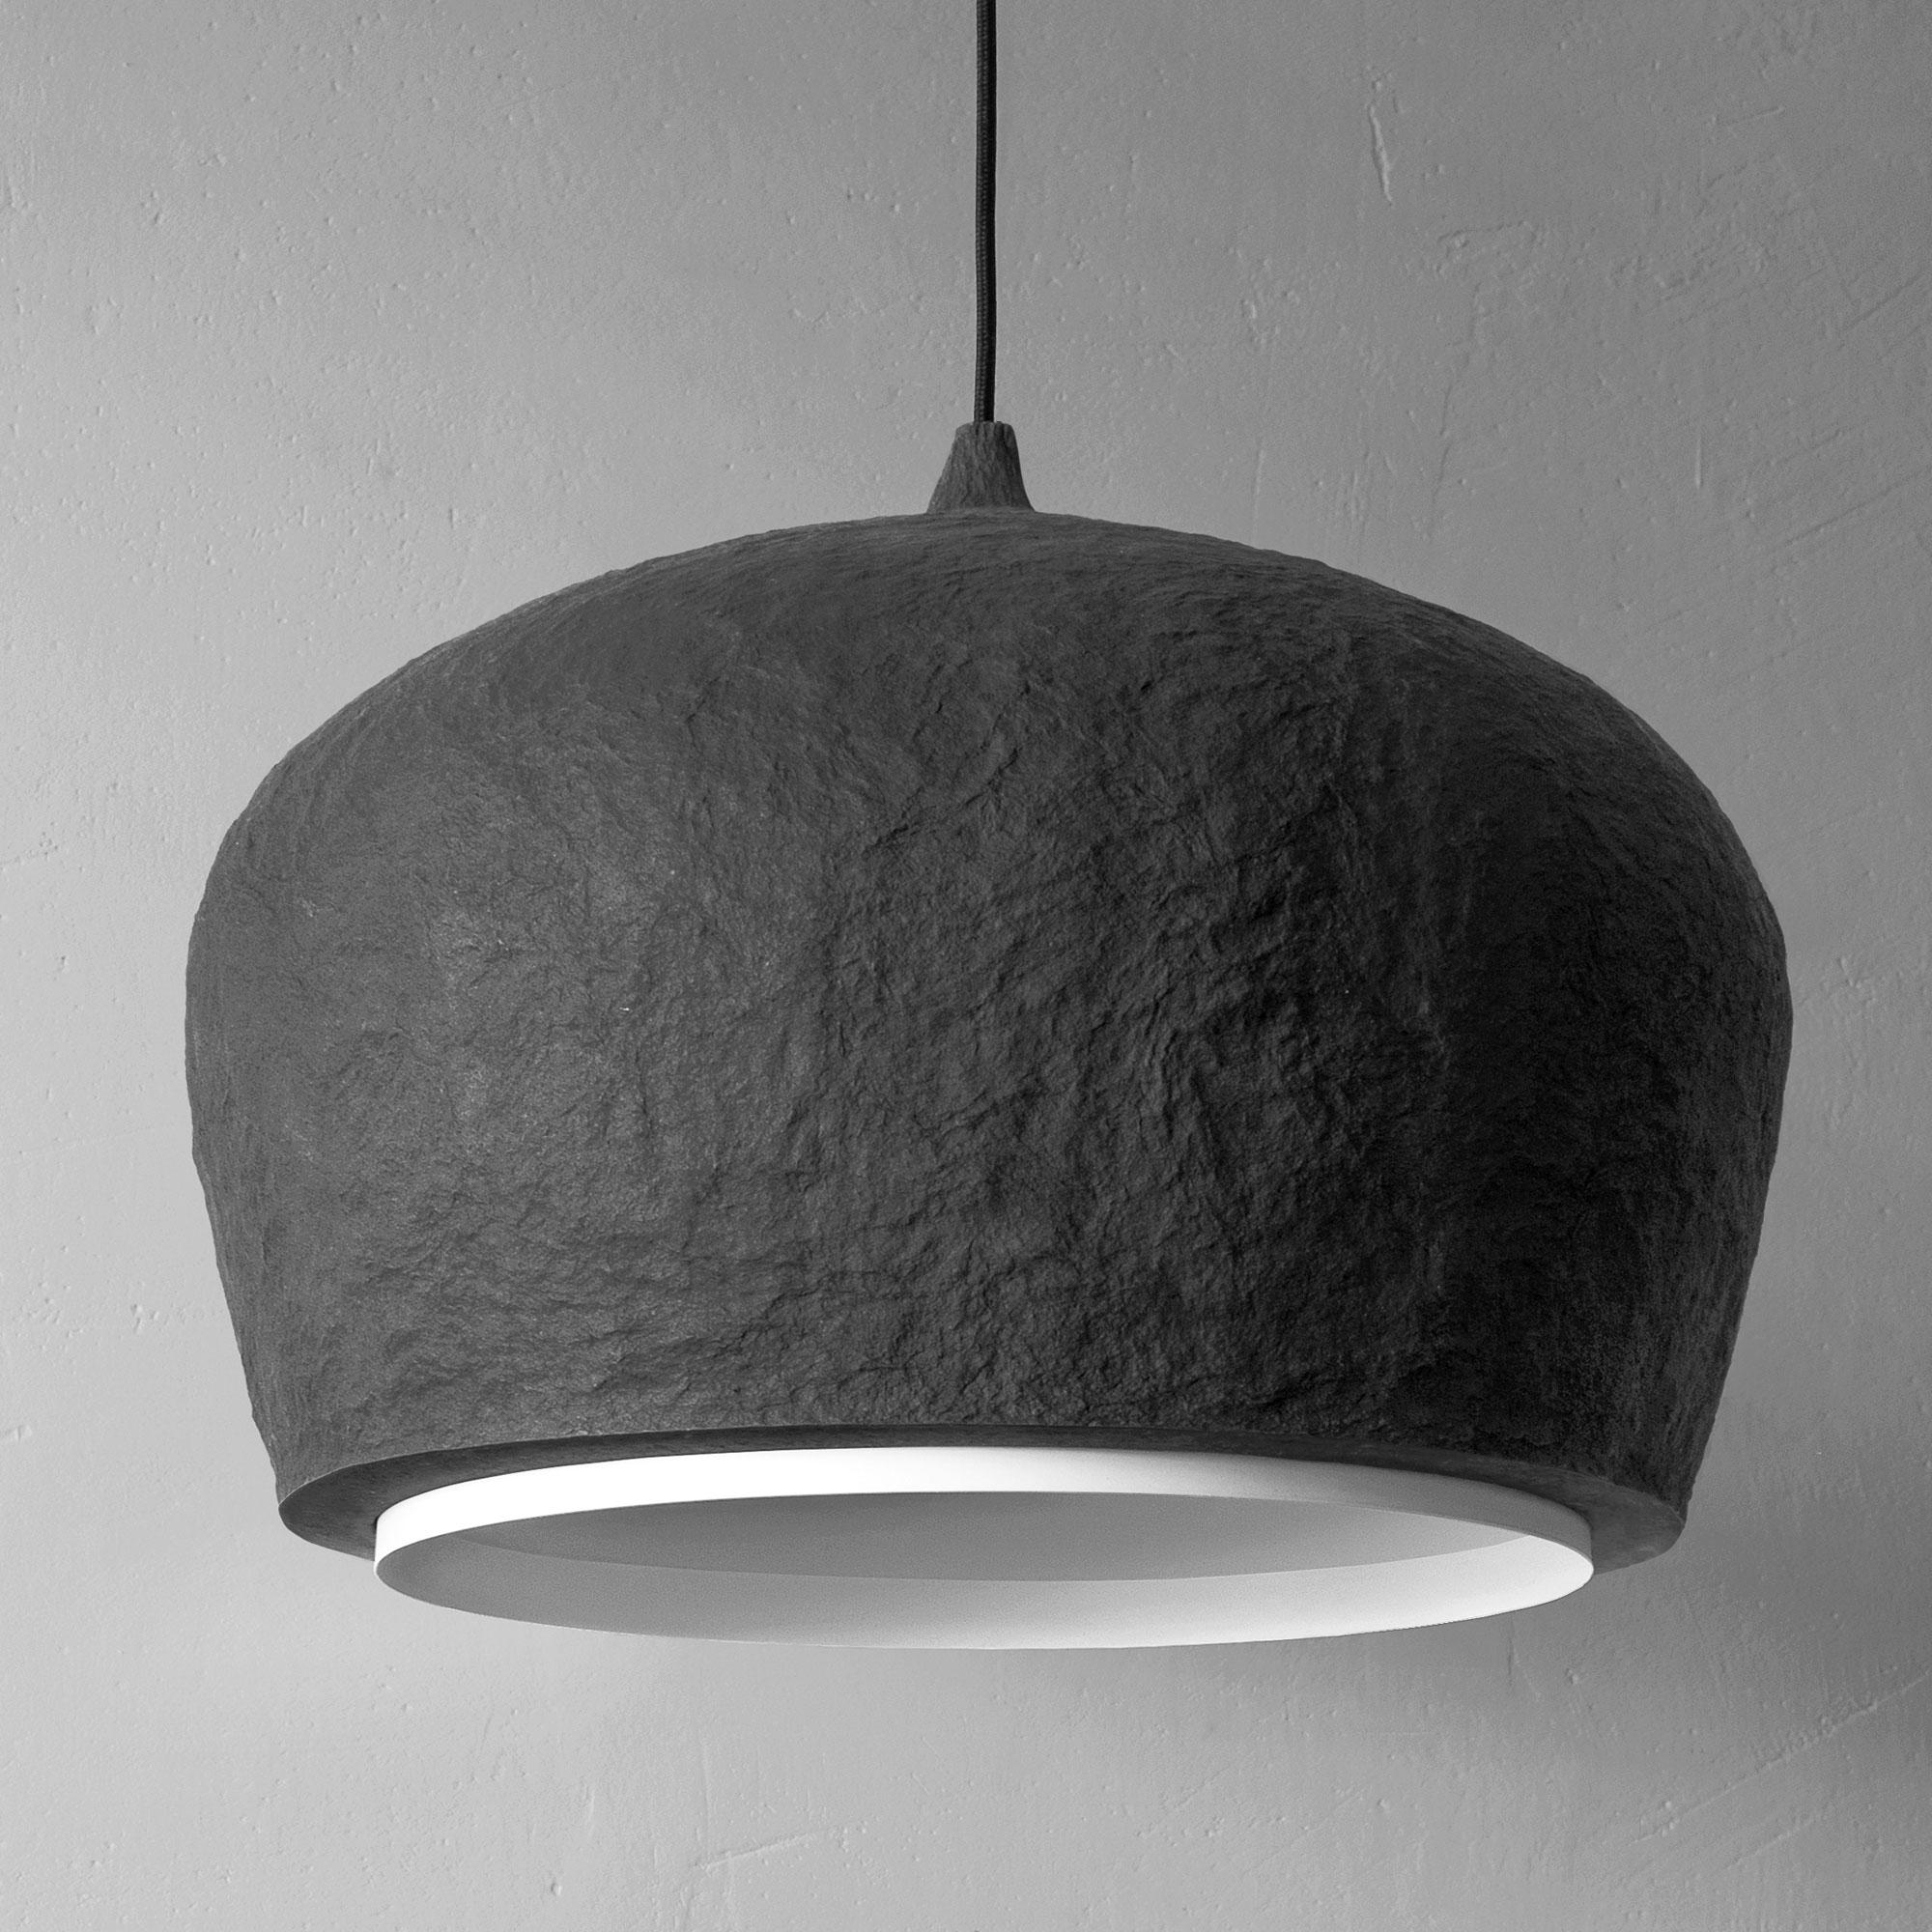 Pendant light “BALANCE”, black, low.

A combination of natural stone-like rigidity and lightness of a cloud. These handmade ceiling lights have a unique character and bring a sense of harmony. The ceiling lights are a versatile fit for spaces of